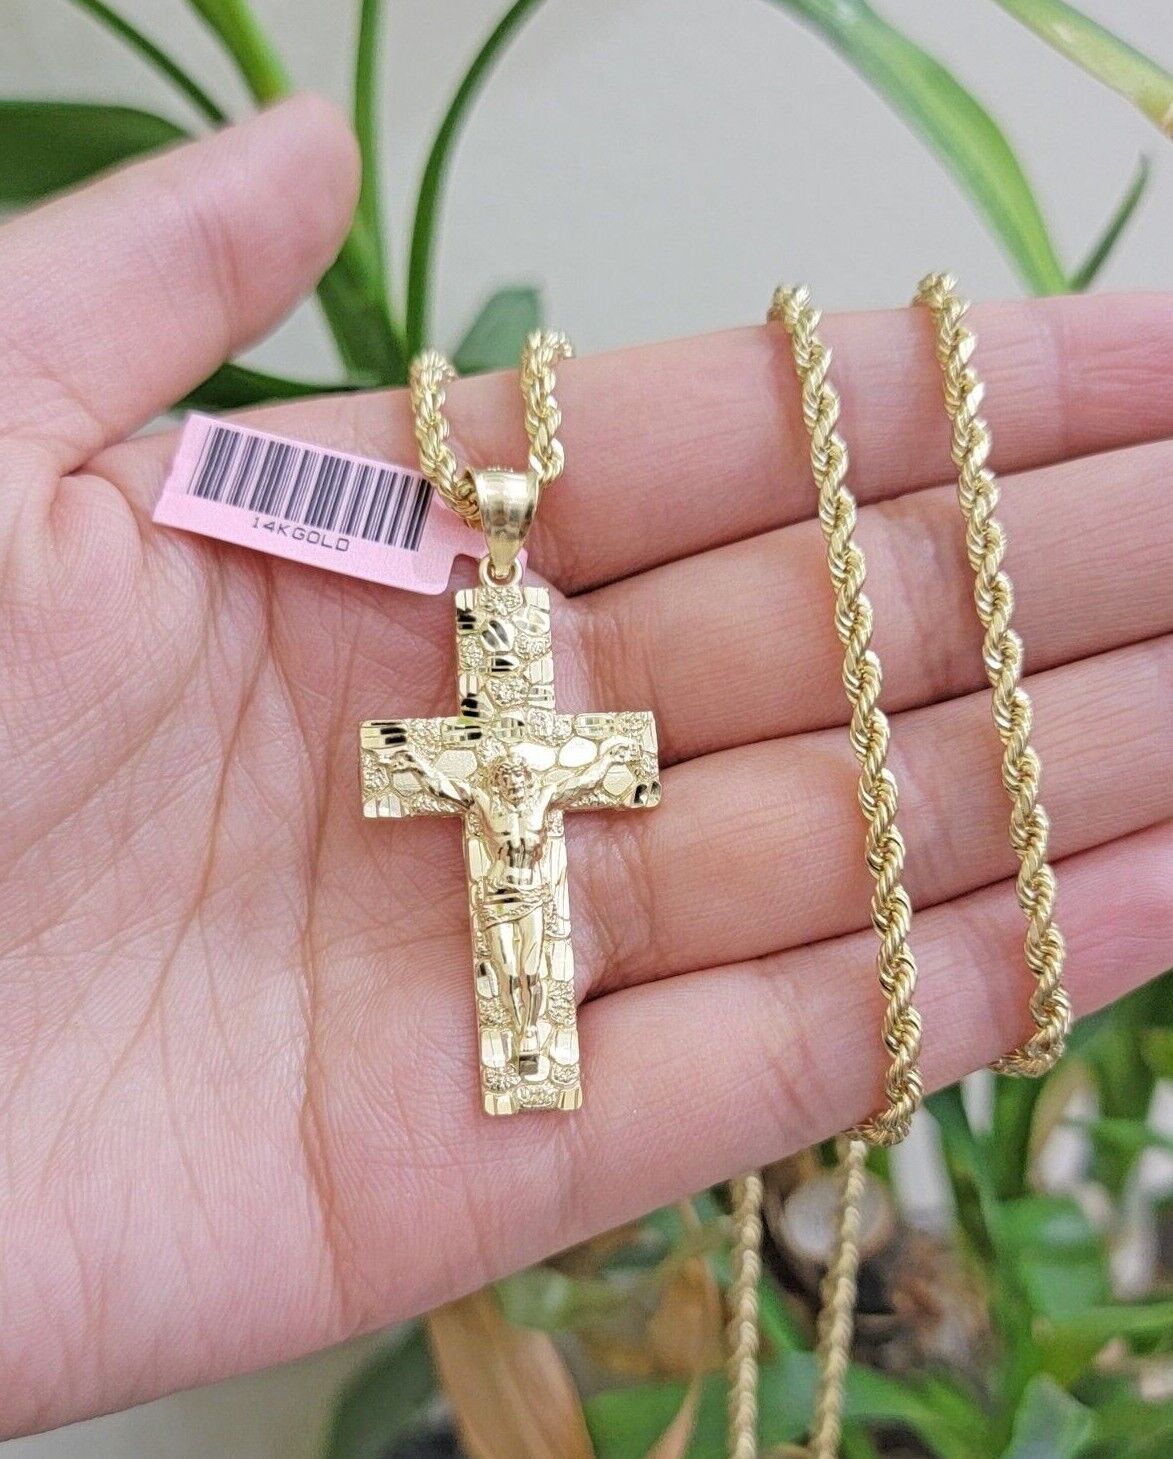 REAL 14k Gold Rope Chain Necklace Nugget Cross Charm Pendant SET 3mm 18 -26 Inch